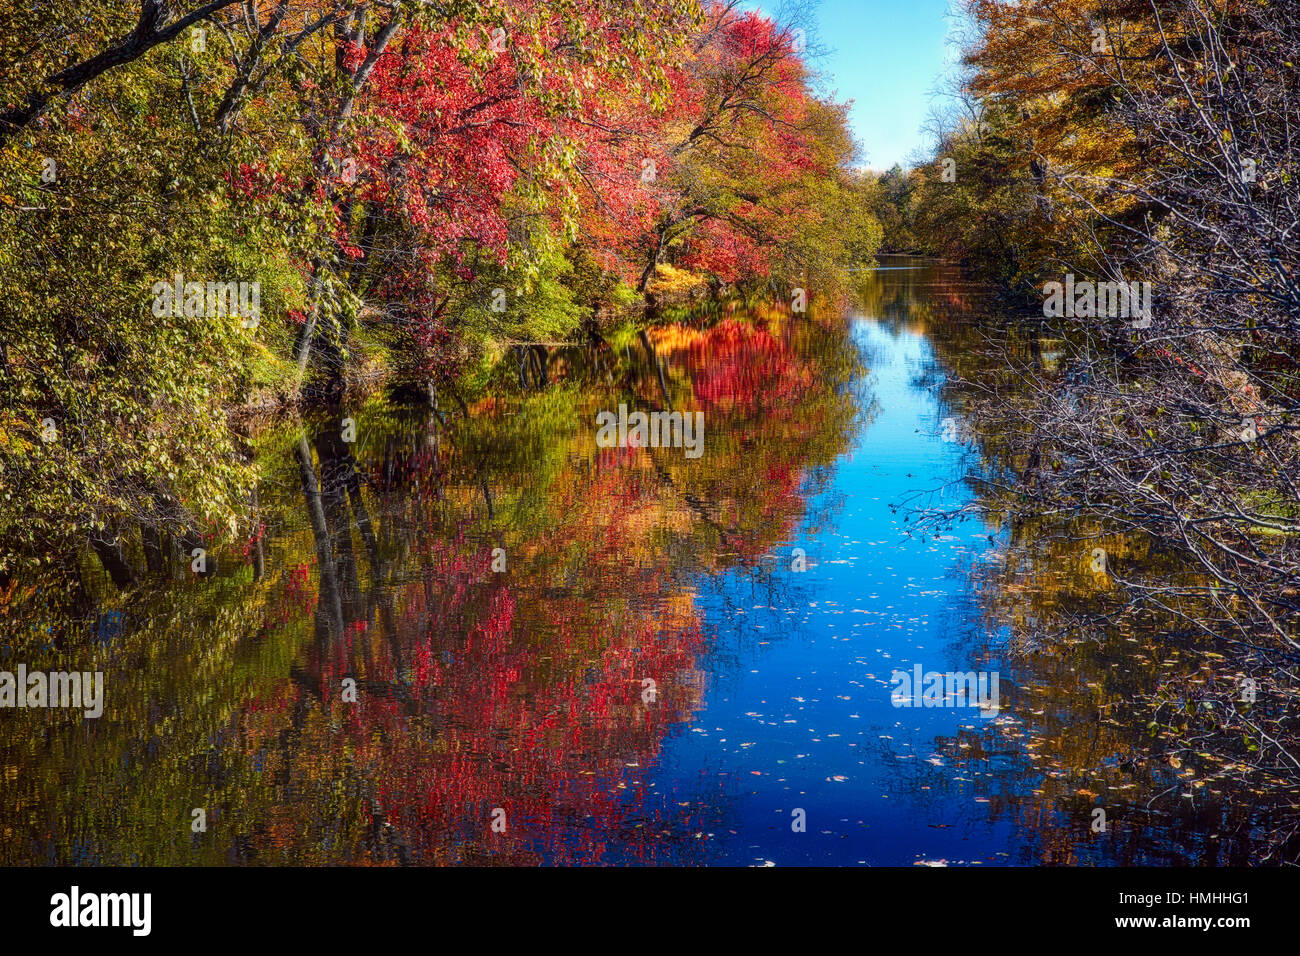 Colorful Autumn Foliage Reflected in a Canal, Princetoin, Mercer County ...